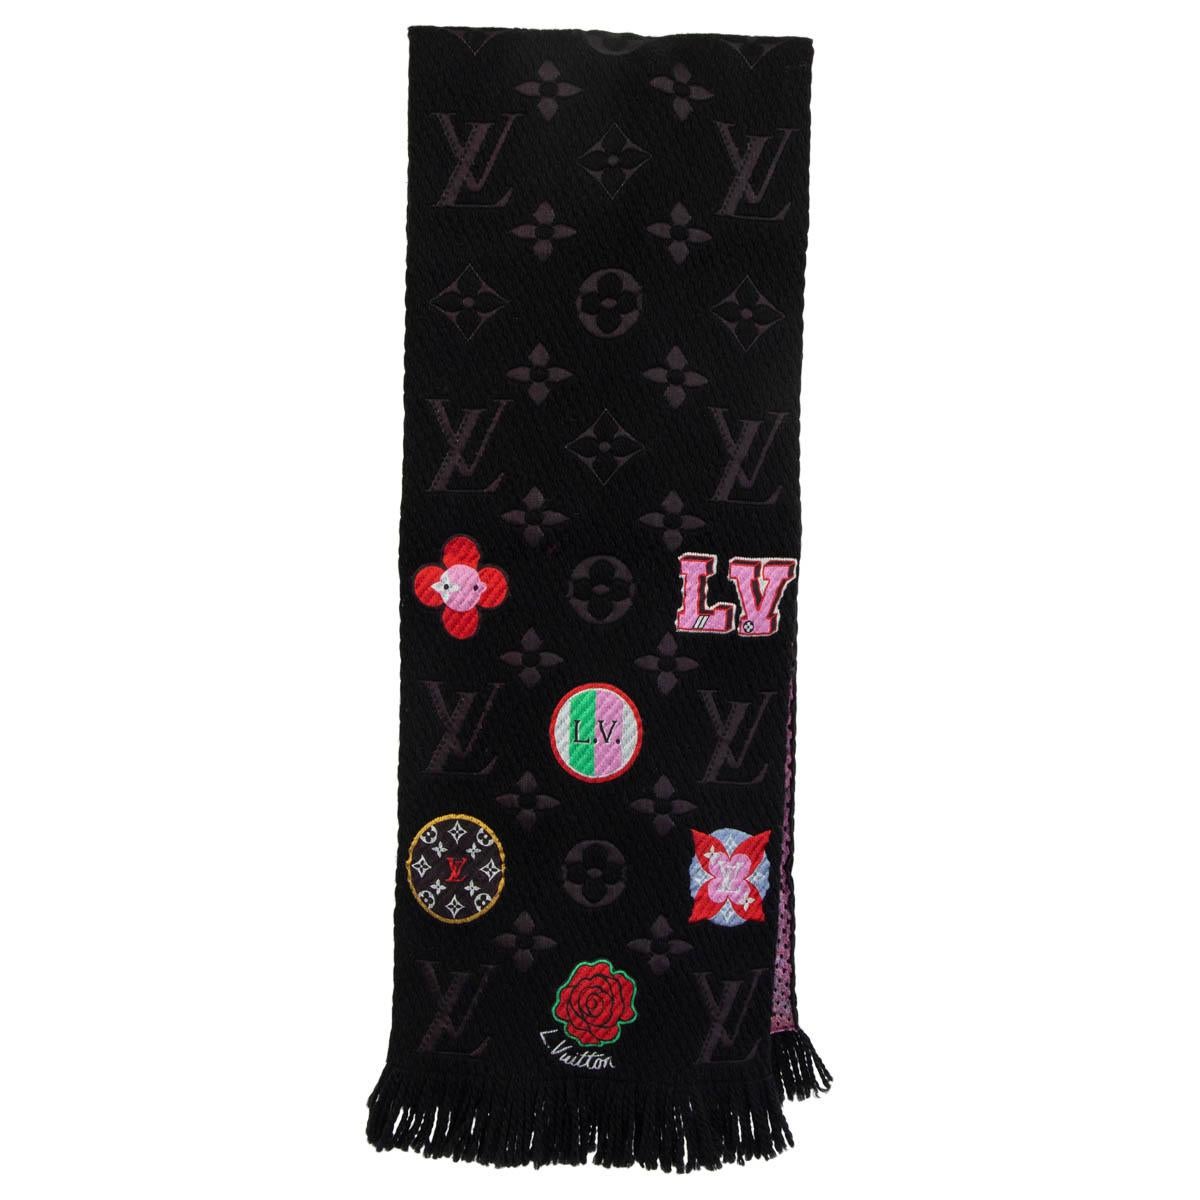 100% authentic Louis Vuitton Stories Logomania fringe shawl in black wool (74%) and silk (26%) with signature House motifs, including Monogram flowers, in the form of colorful patches. The designs are layered over an allover Monogram jacquard weave.